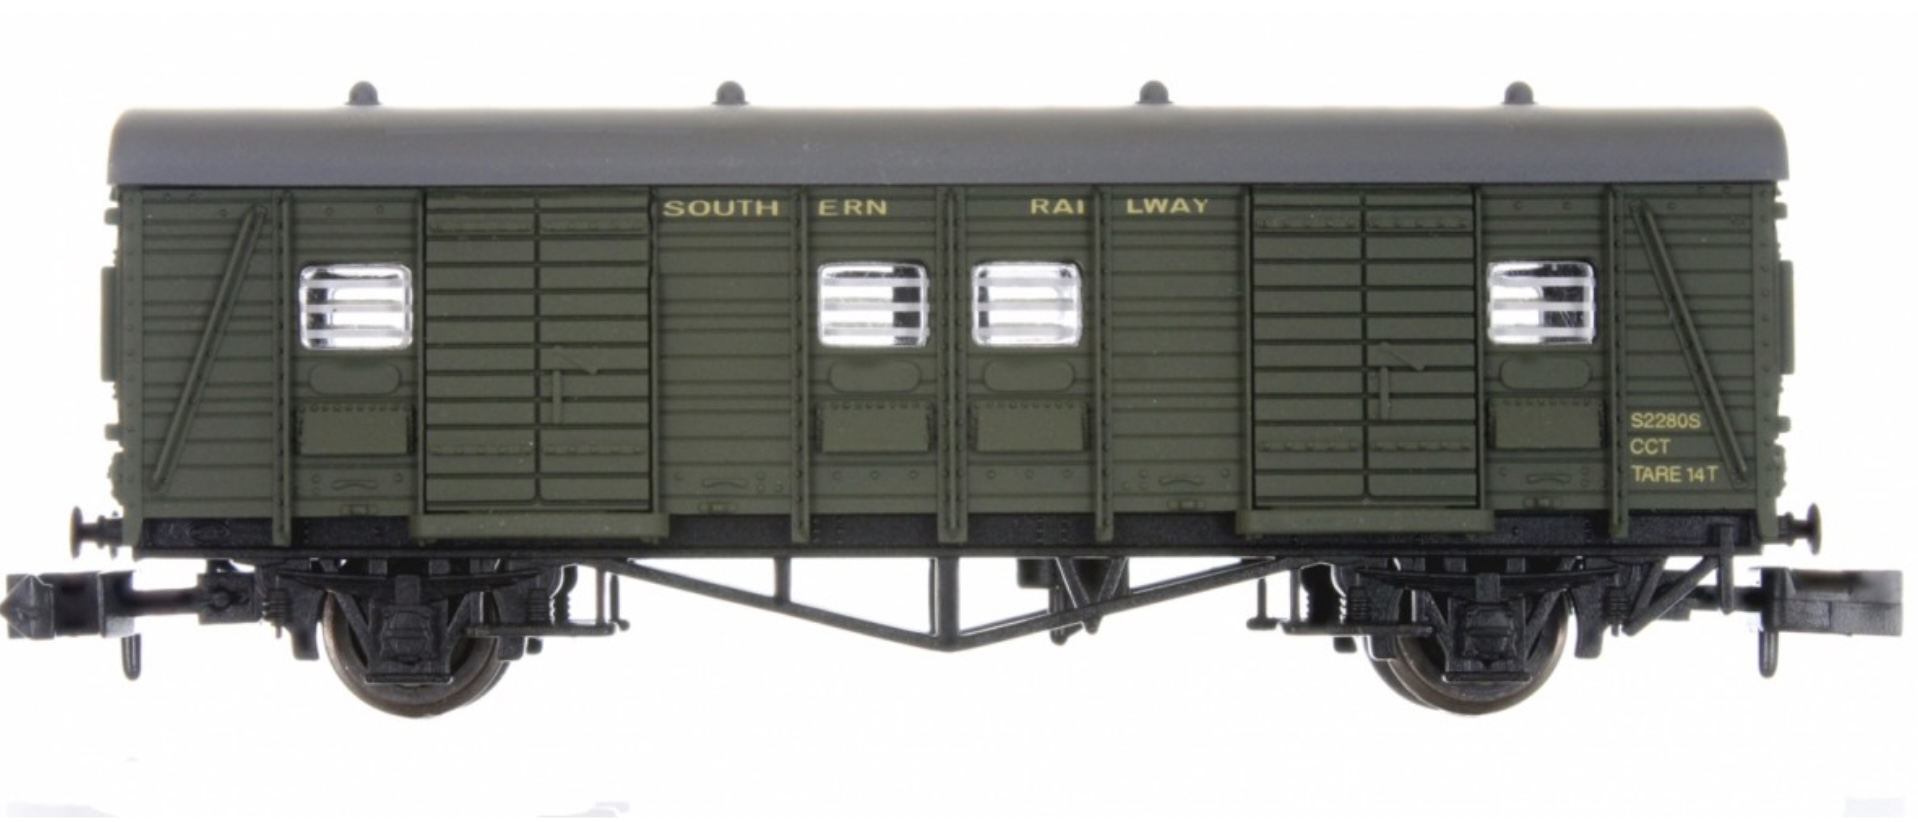 N Scale - Dapol - 2F-047-011 - Covered Carriage Truck, Parcel - Southern (UK) - S2280S